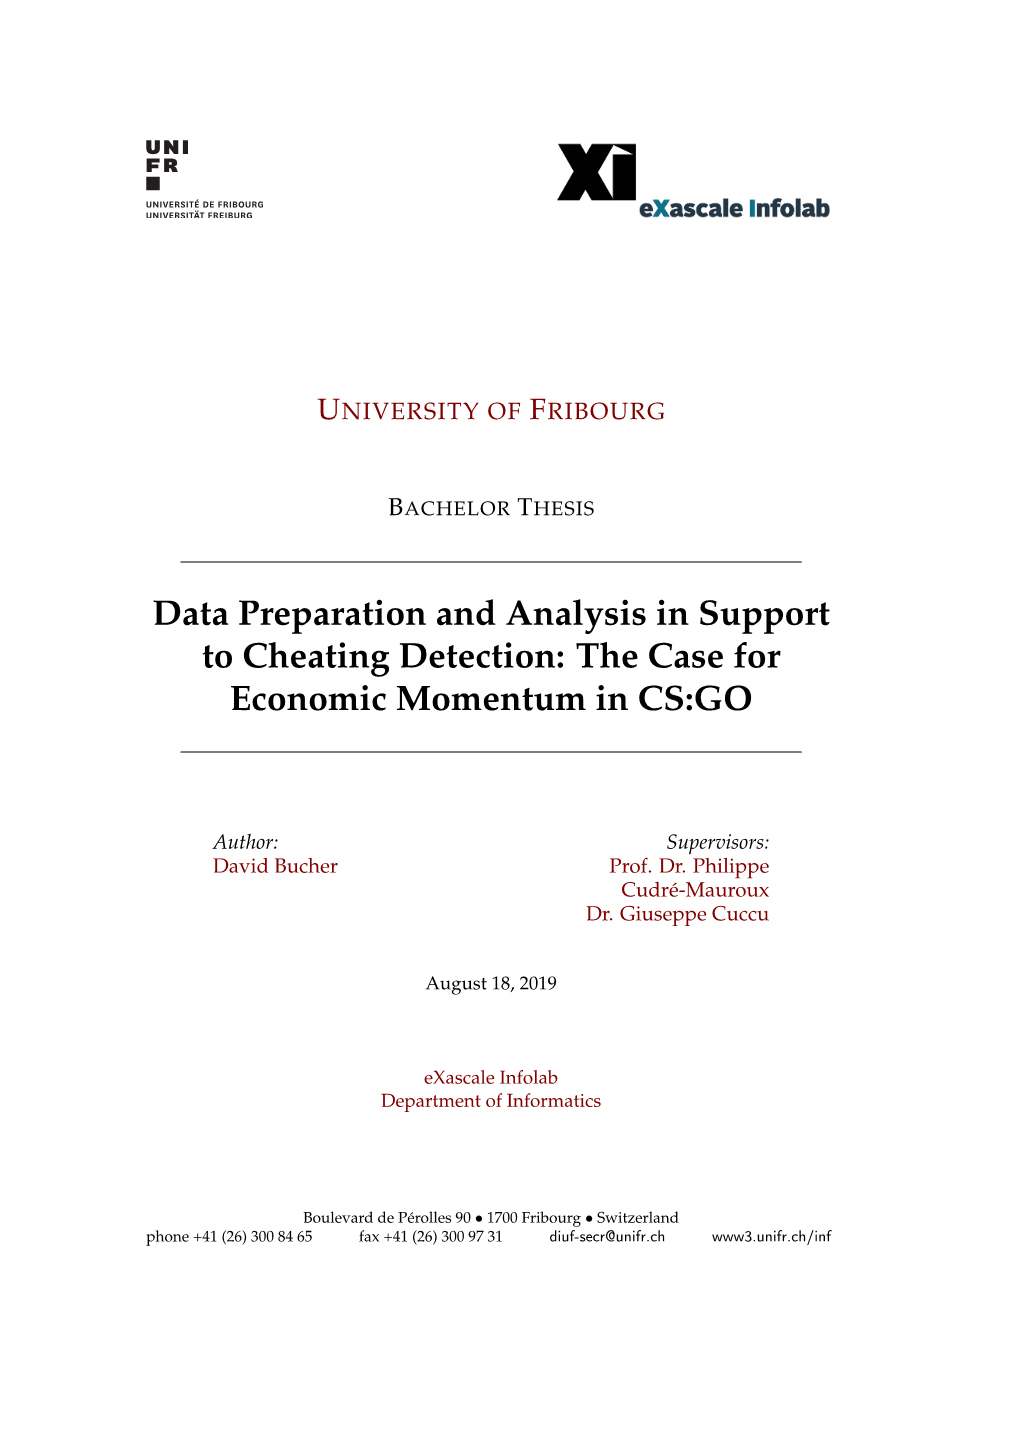 Data Preparation and Analysis in Support to Cheating Detection: the Case for Economic Momentum in CS:GO